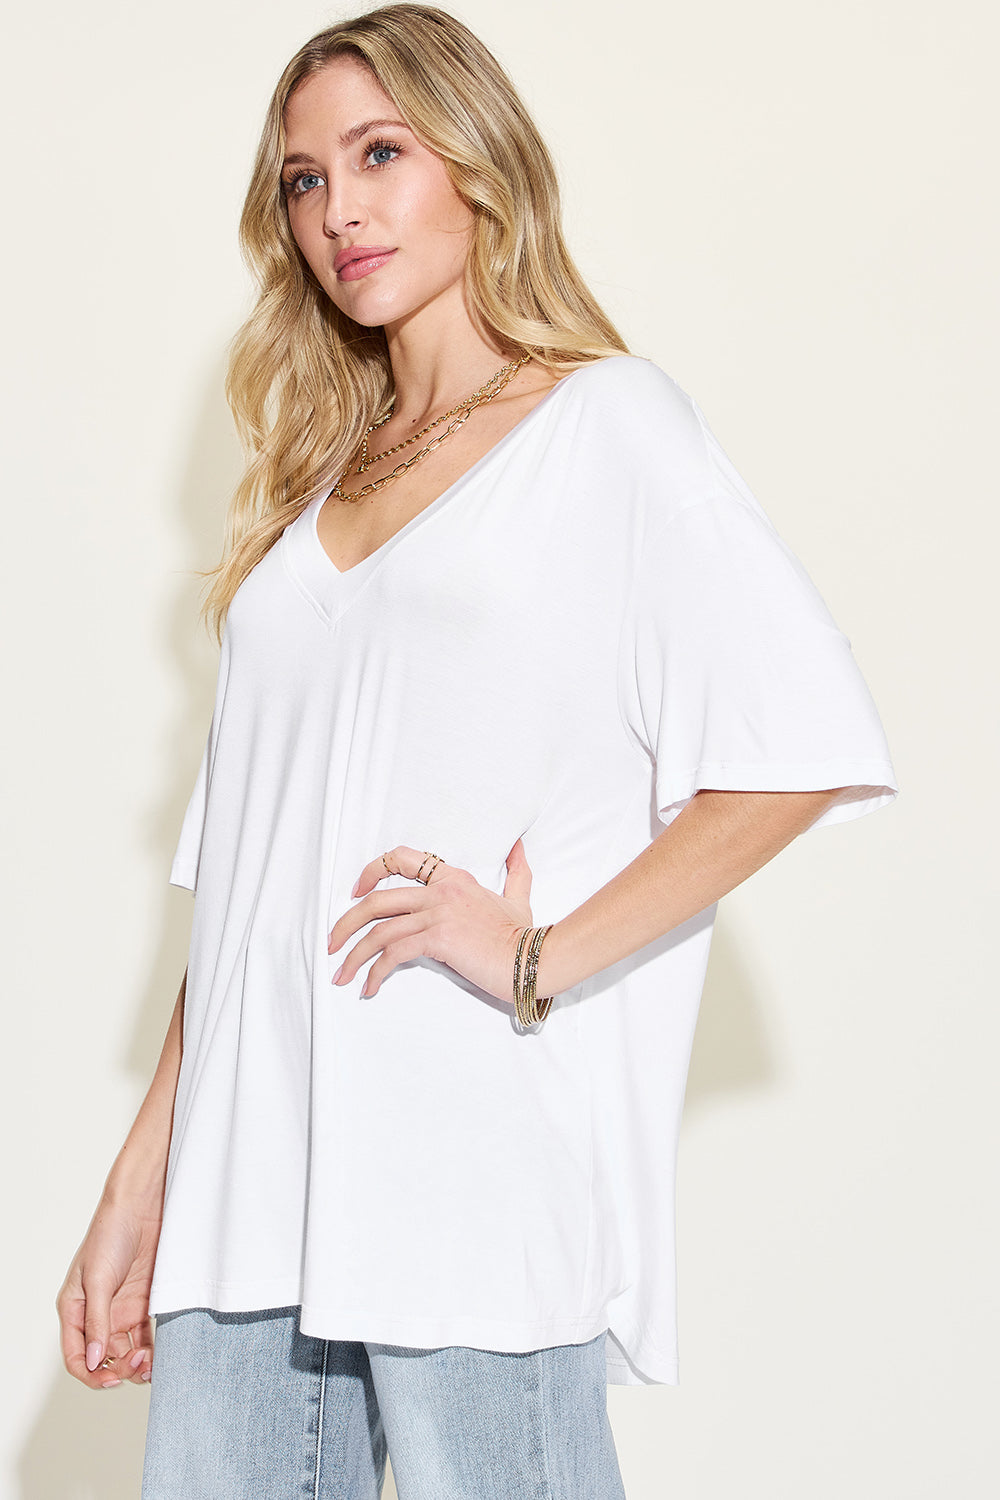 Relaxed Fit Bamboo Tee with Drop Shoulder